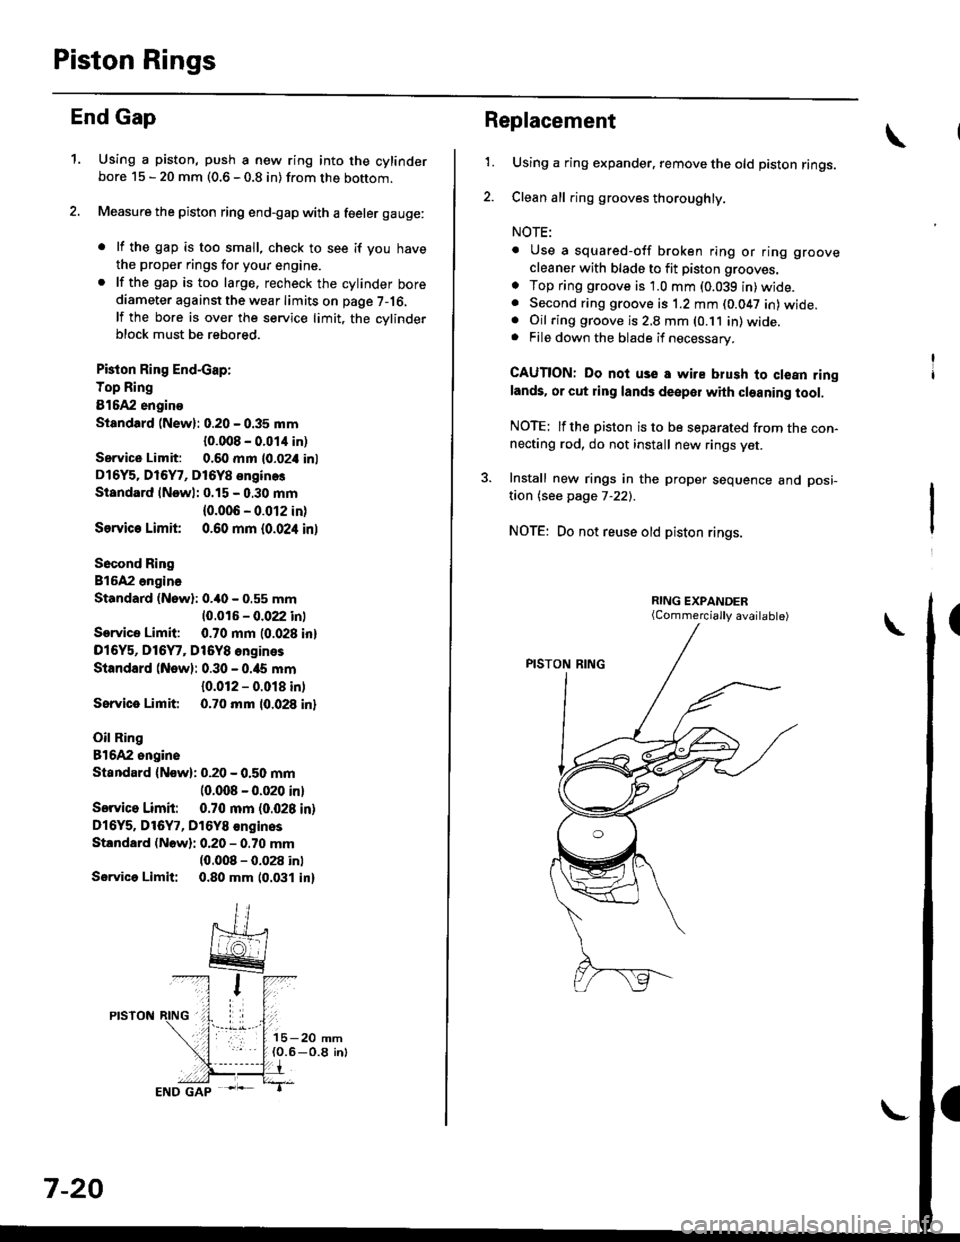 HONDA CIVIC 1998 6.G User Guide Piston Rings
End Gap
1.Using a piston, push a new ring into the cylinderbore 15 - 20 mm (0.6 - 0.8 in) from the bottom.
Measure the piston ring end-gap with a feeler gauge:
. lf the gap is too small, 